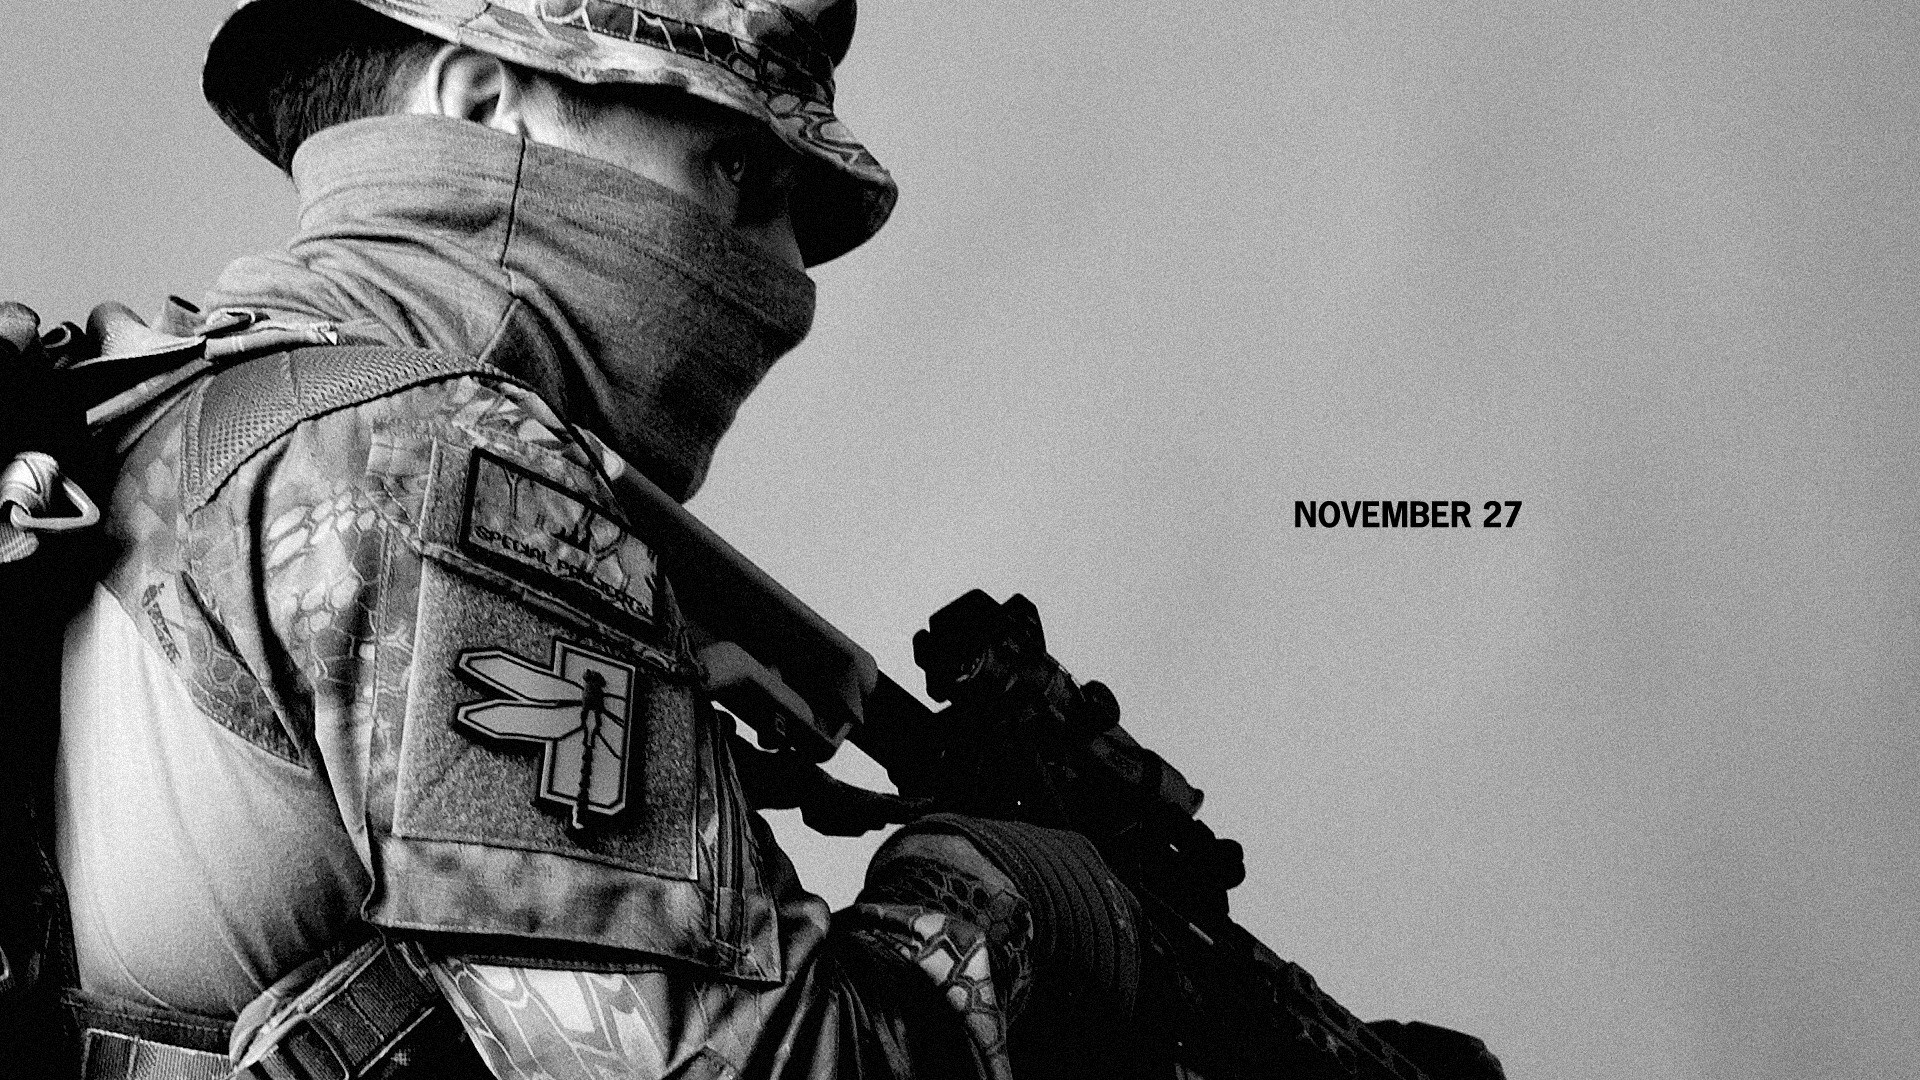 Can't Wait- Something Kryptek Coming From Haley Strategic - Tactical Soldier Wallpaper Hd , HD Wallpaper & Backgrounds